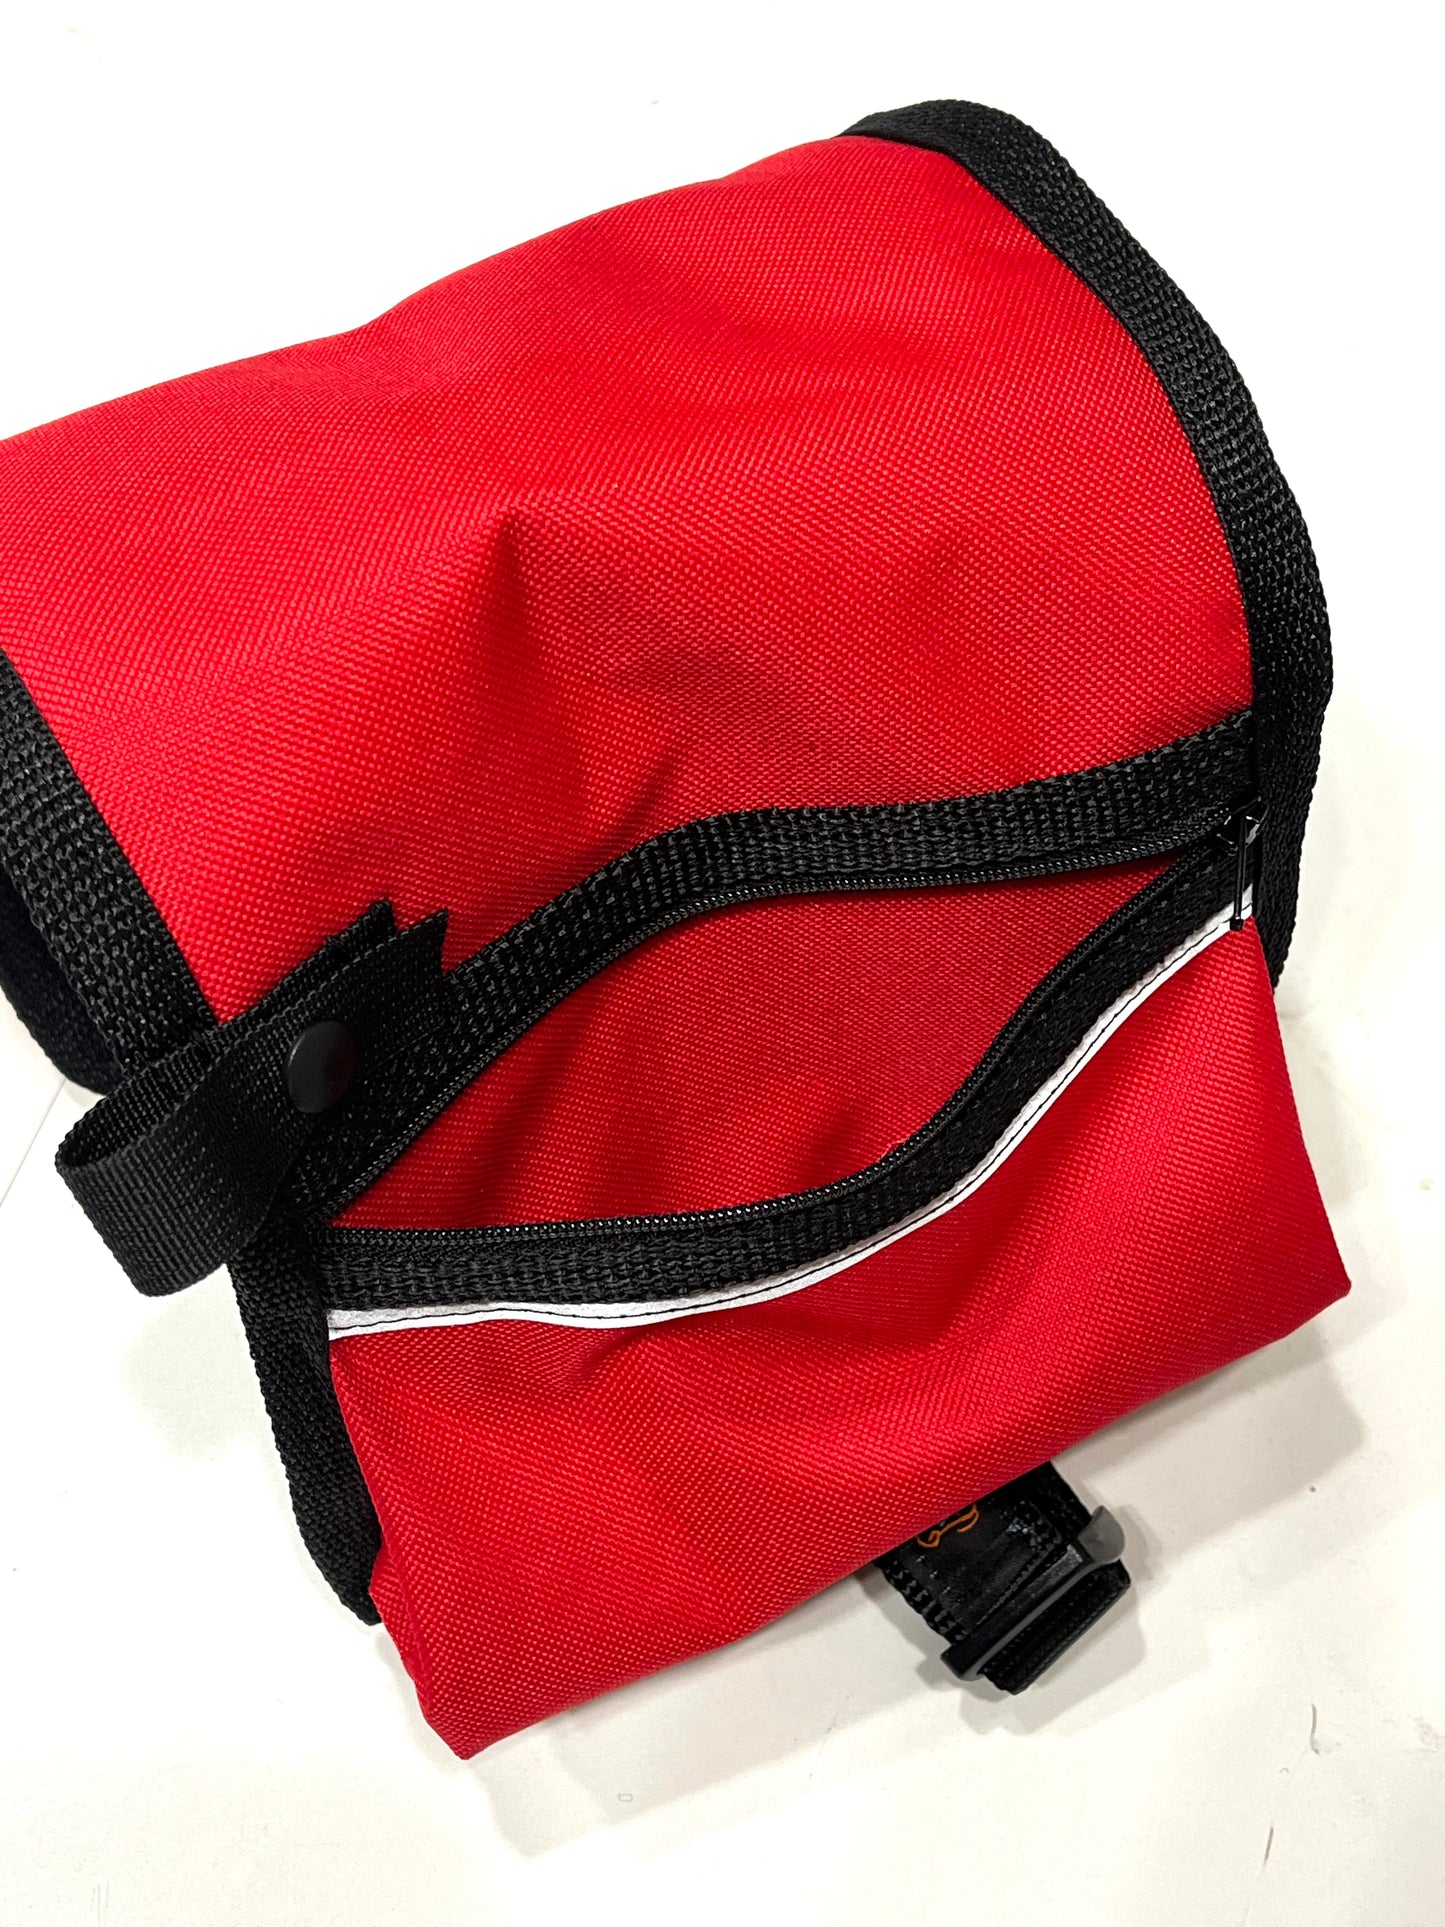 Dog Harness Sundance Cape for Mobility Harness with Expanding Pockets